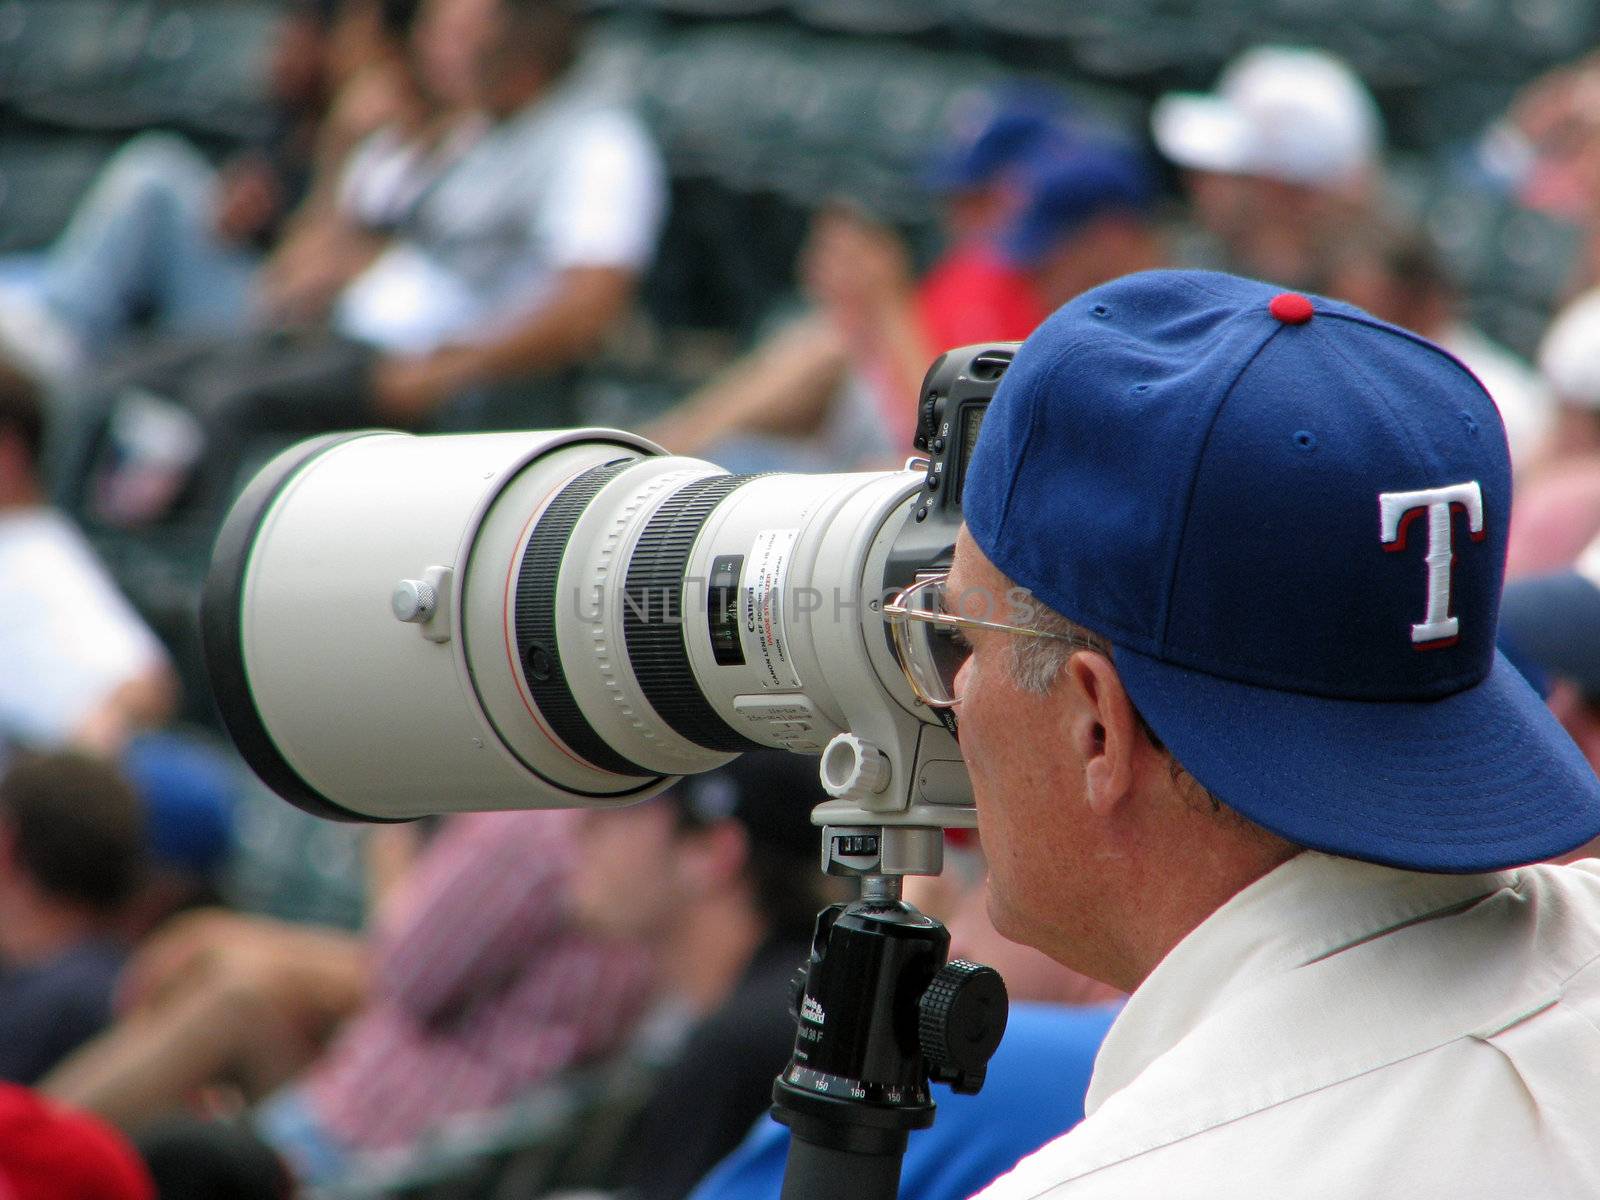 Photographer at a Baseball Game by bellafotosolo